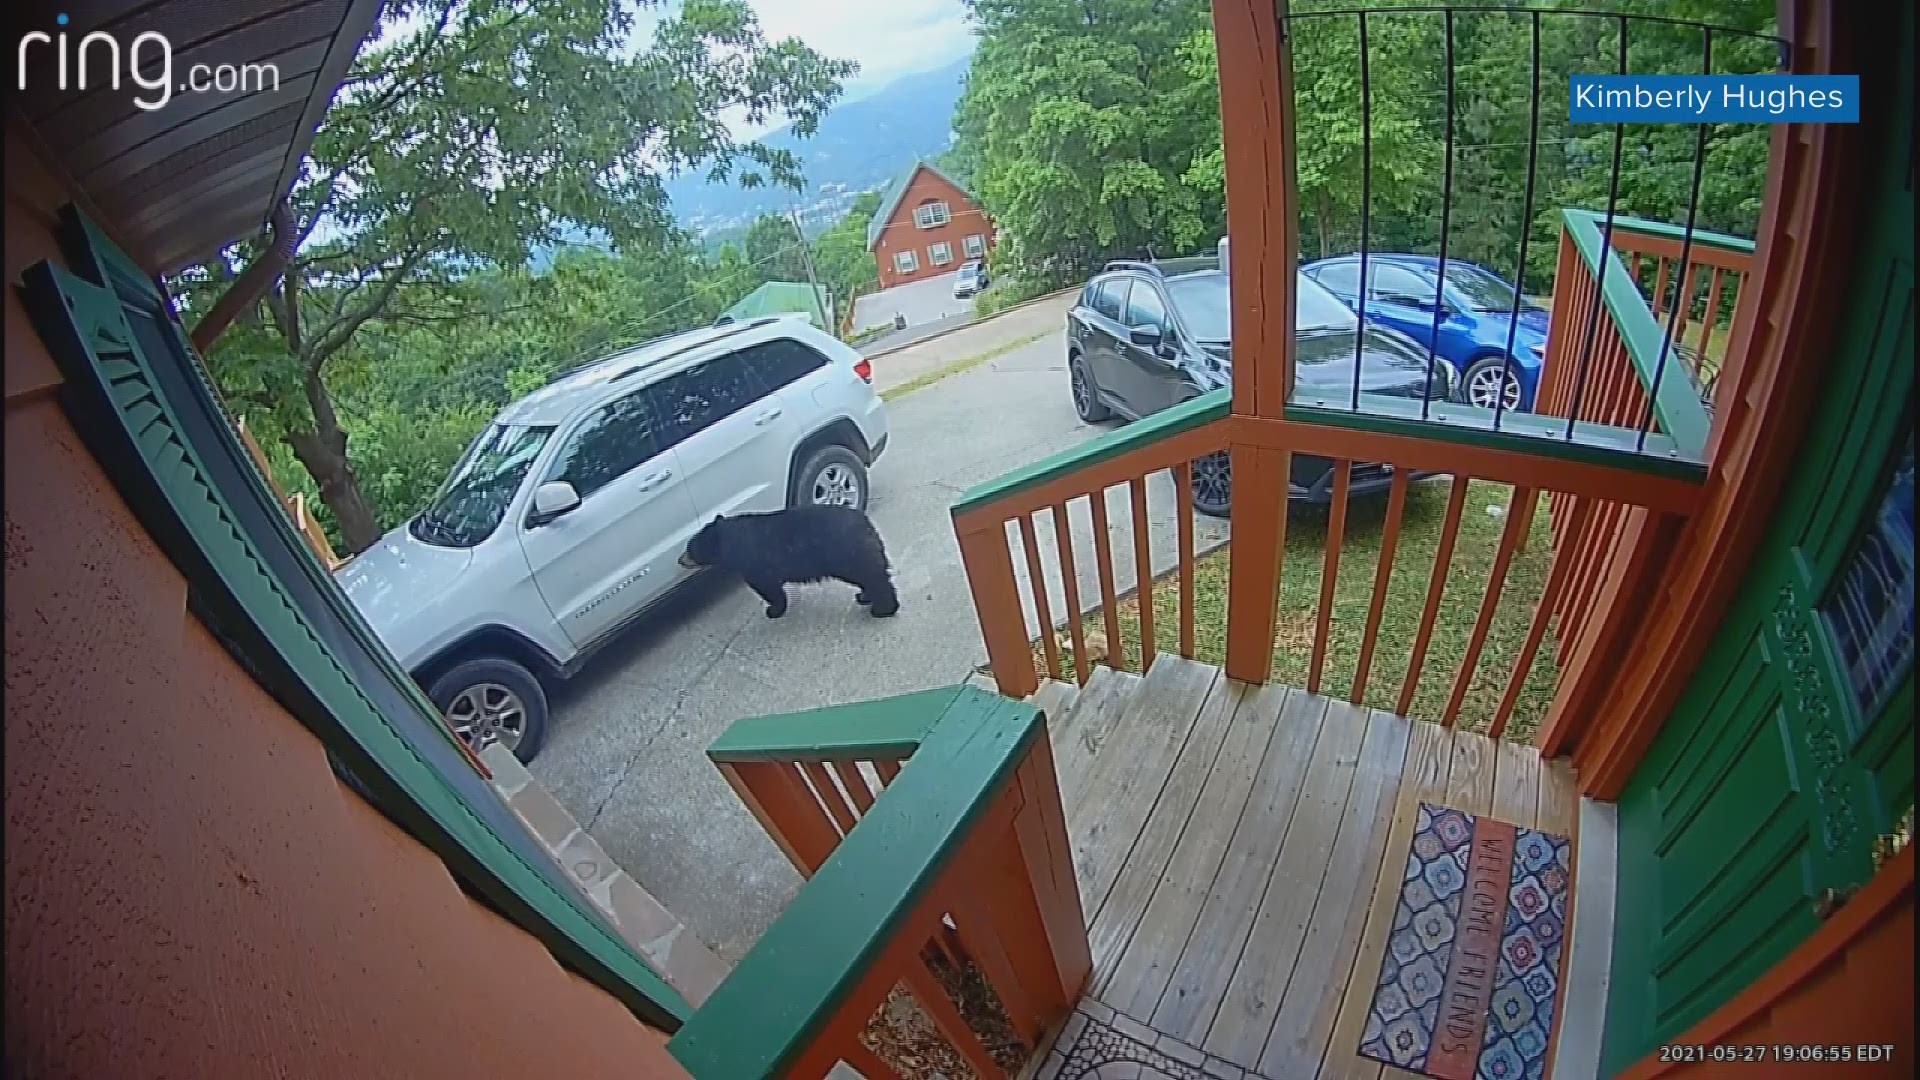 Kimberly Hughes couldn't believe her eyes when she looked at her Ring Doorbell camera from her Gatlinburg cabin.